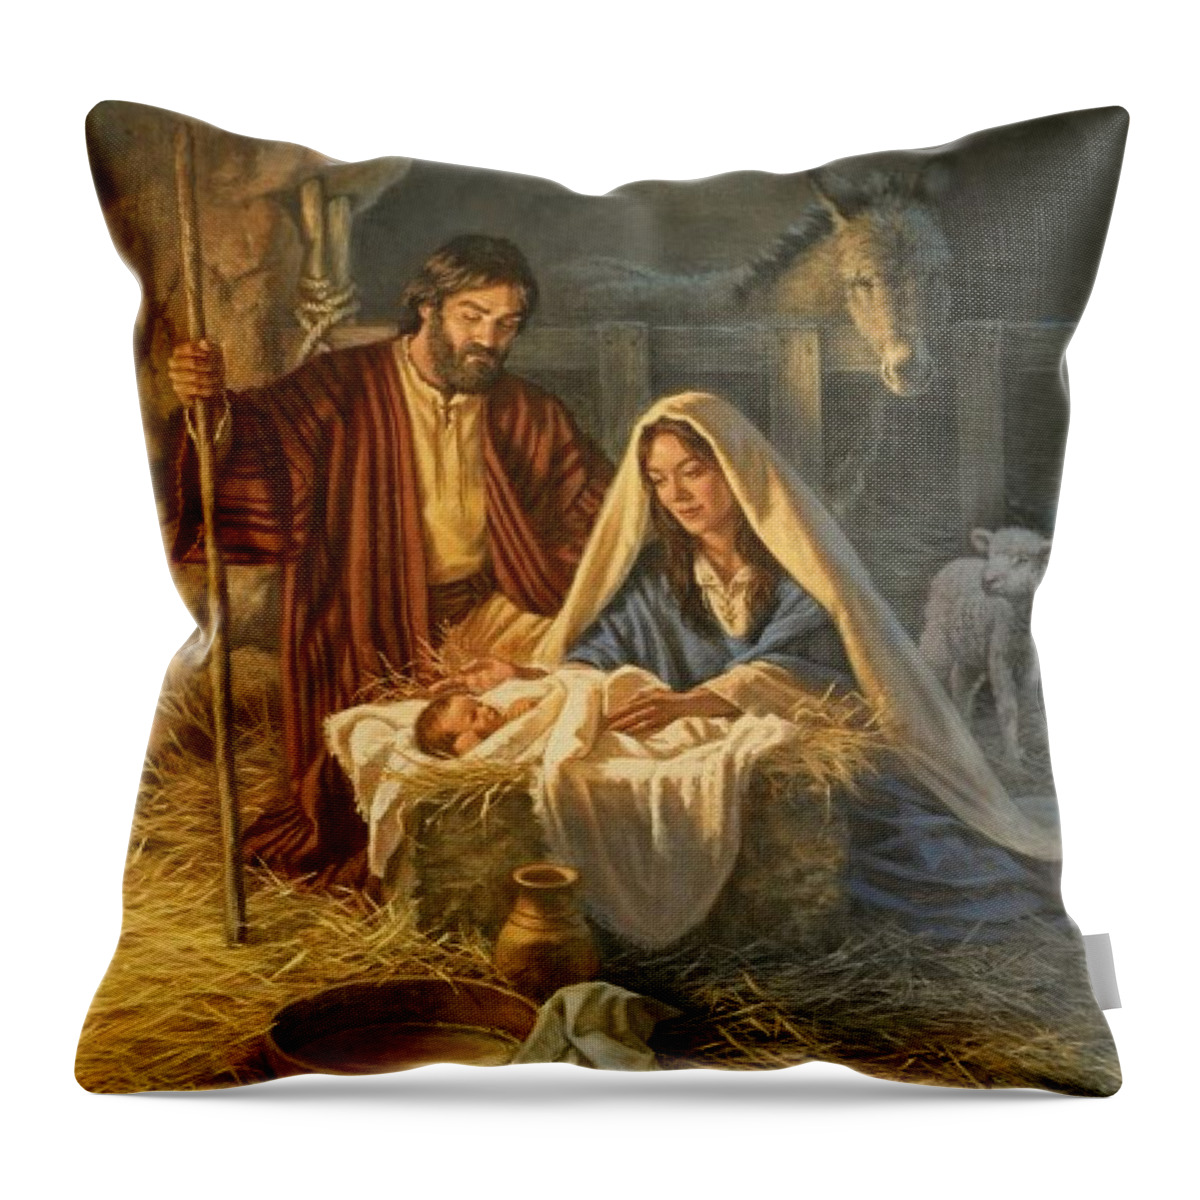 Nativity Throw Pillow featuring the painting The Nativity by Artist Unknown